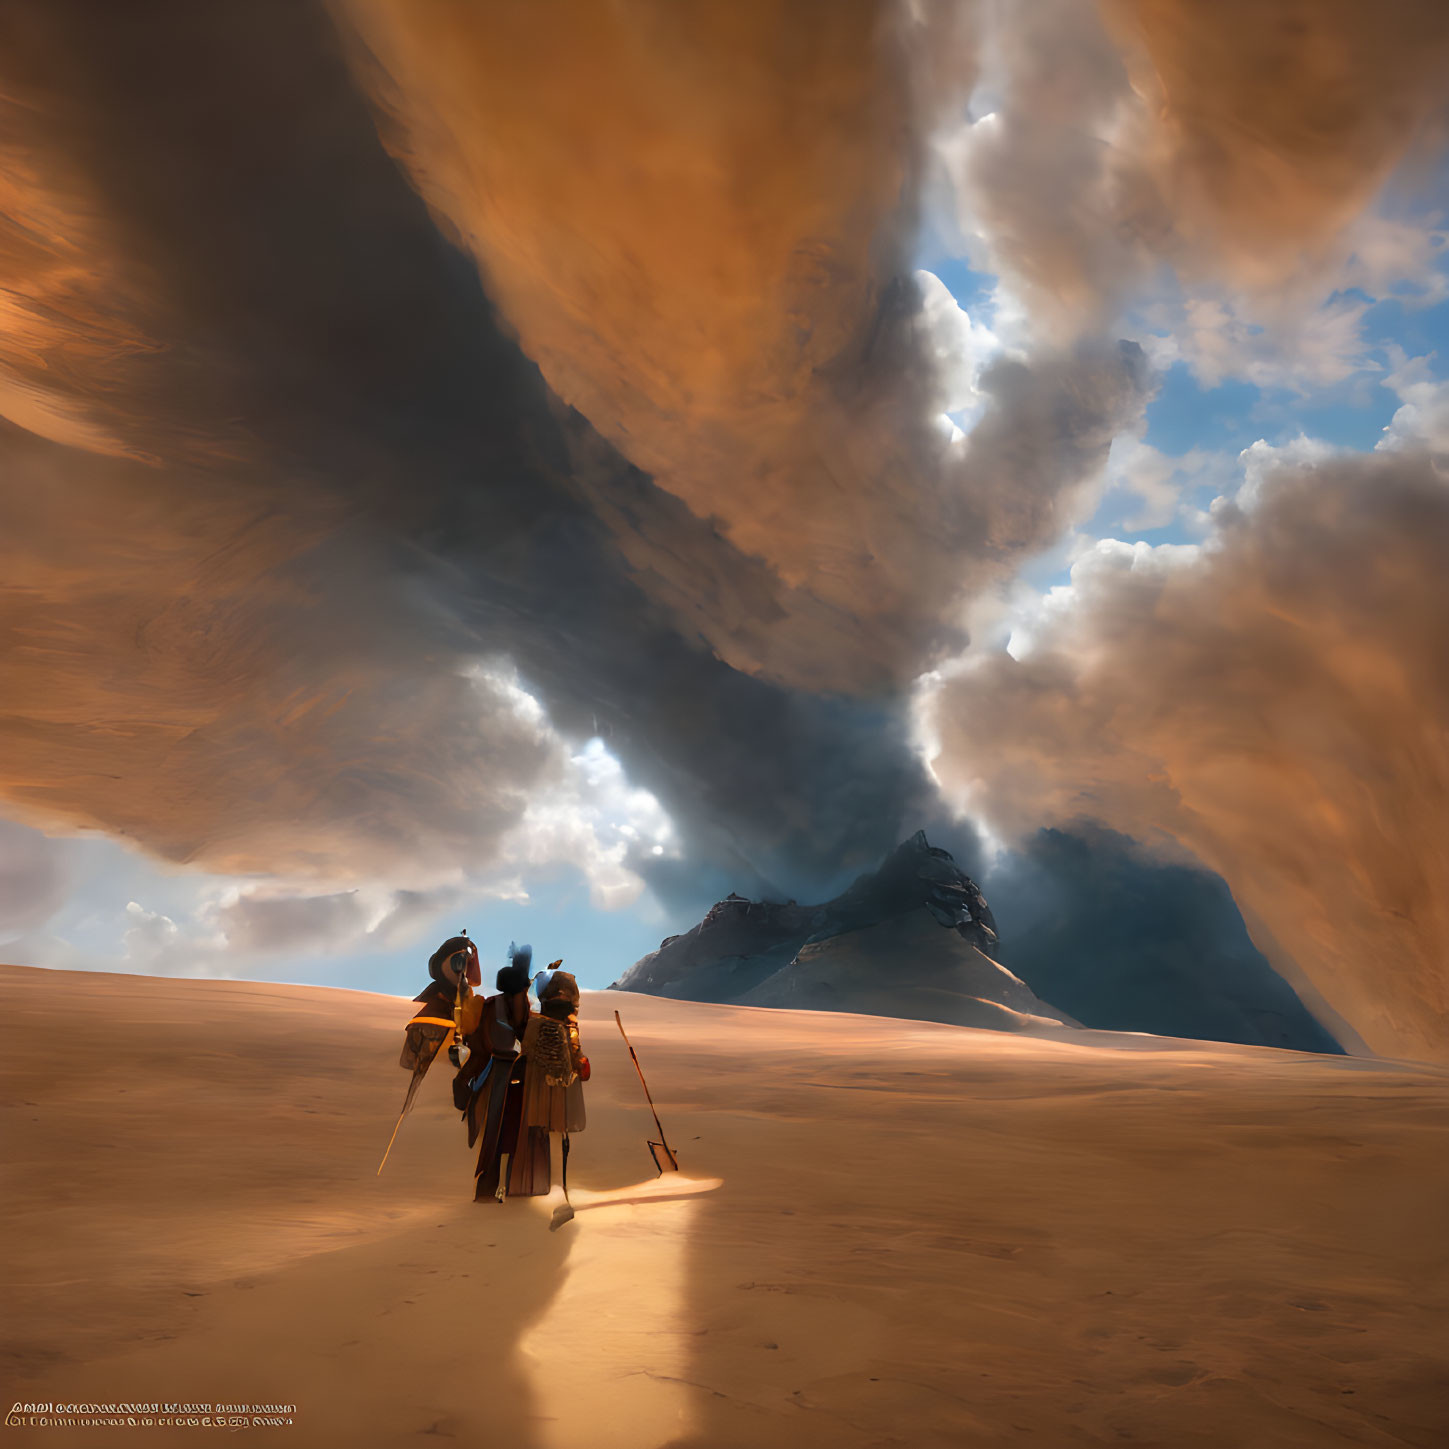 Three travelers with staffs on sandy expanse, facing dramatic mountain under swirling sky